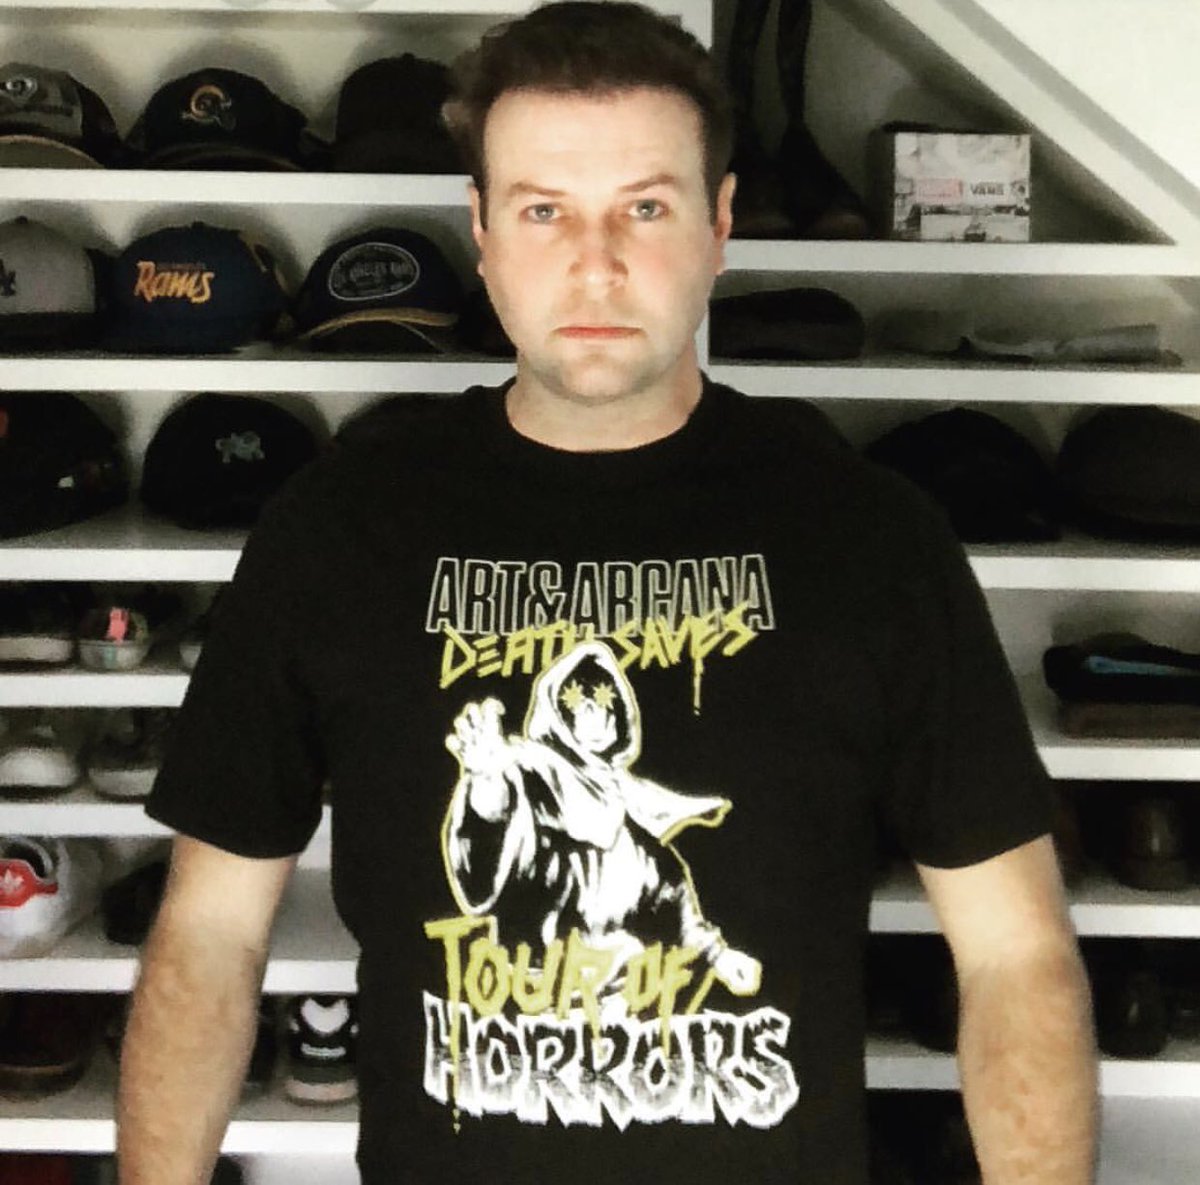 RT @deathsaves: Friend of the Saves @TaranKillam repping the ART & ARCANA “Tour of Horrors” shirt ???????? https://t.co/h3siMbteHS